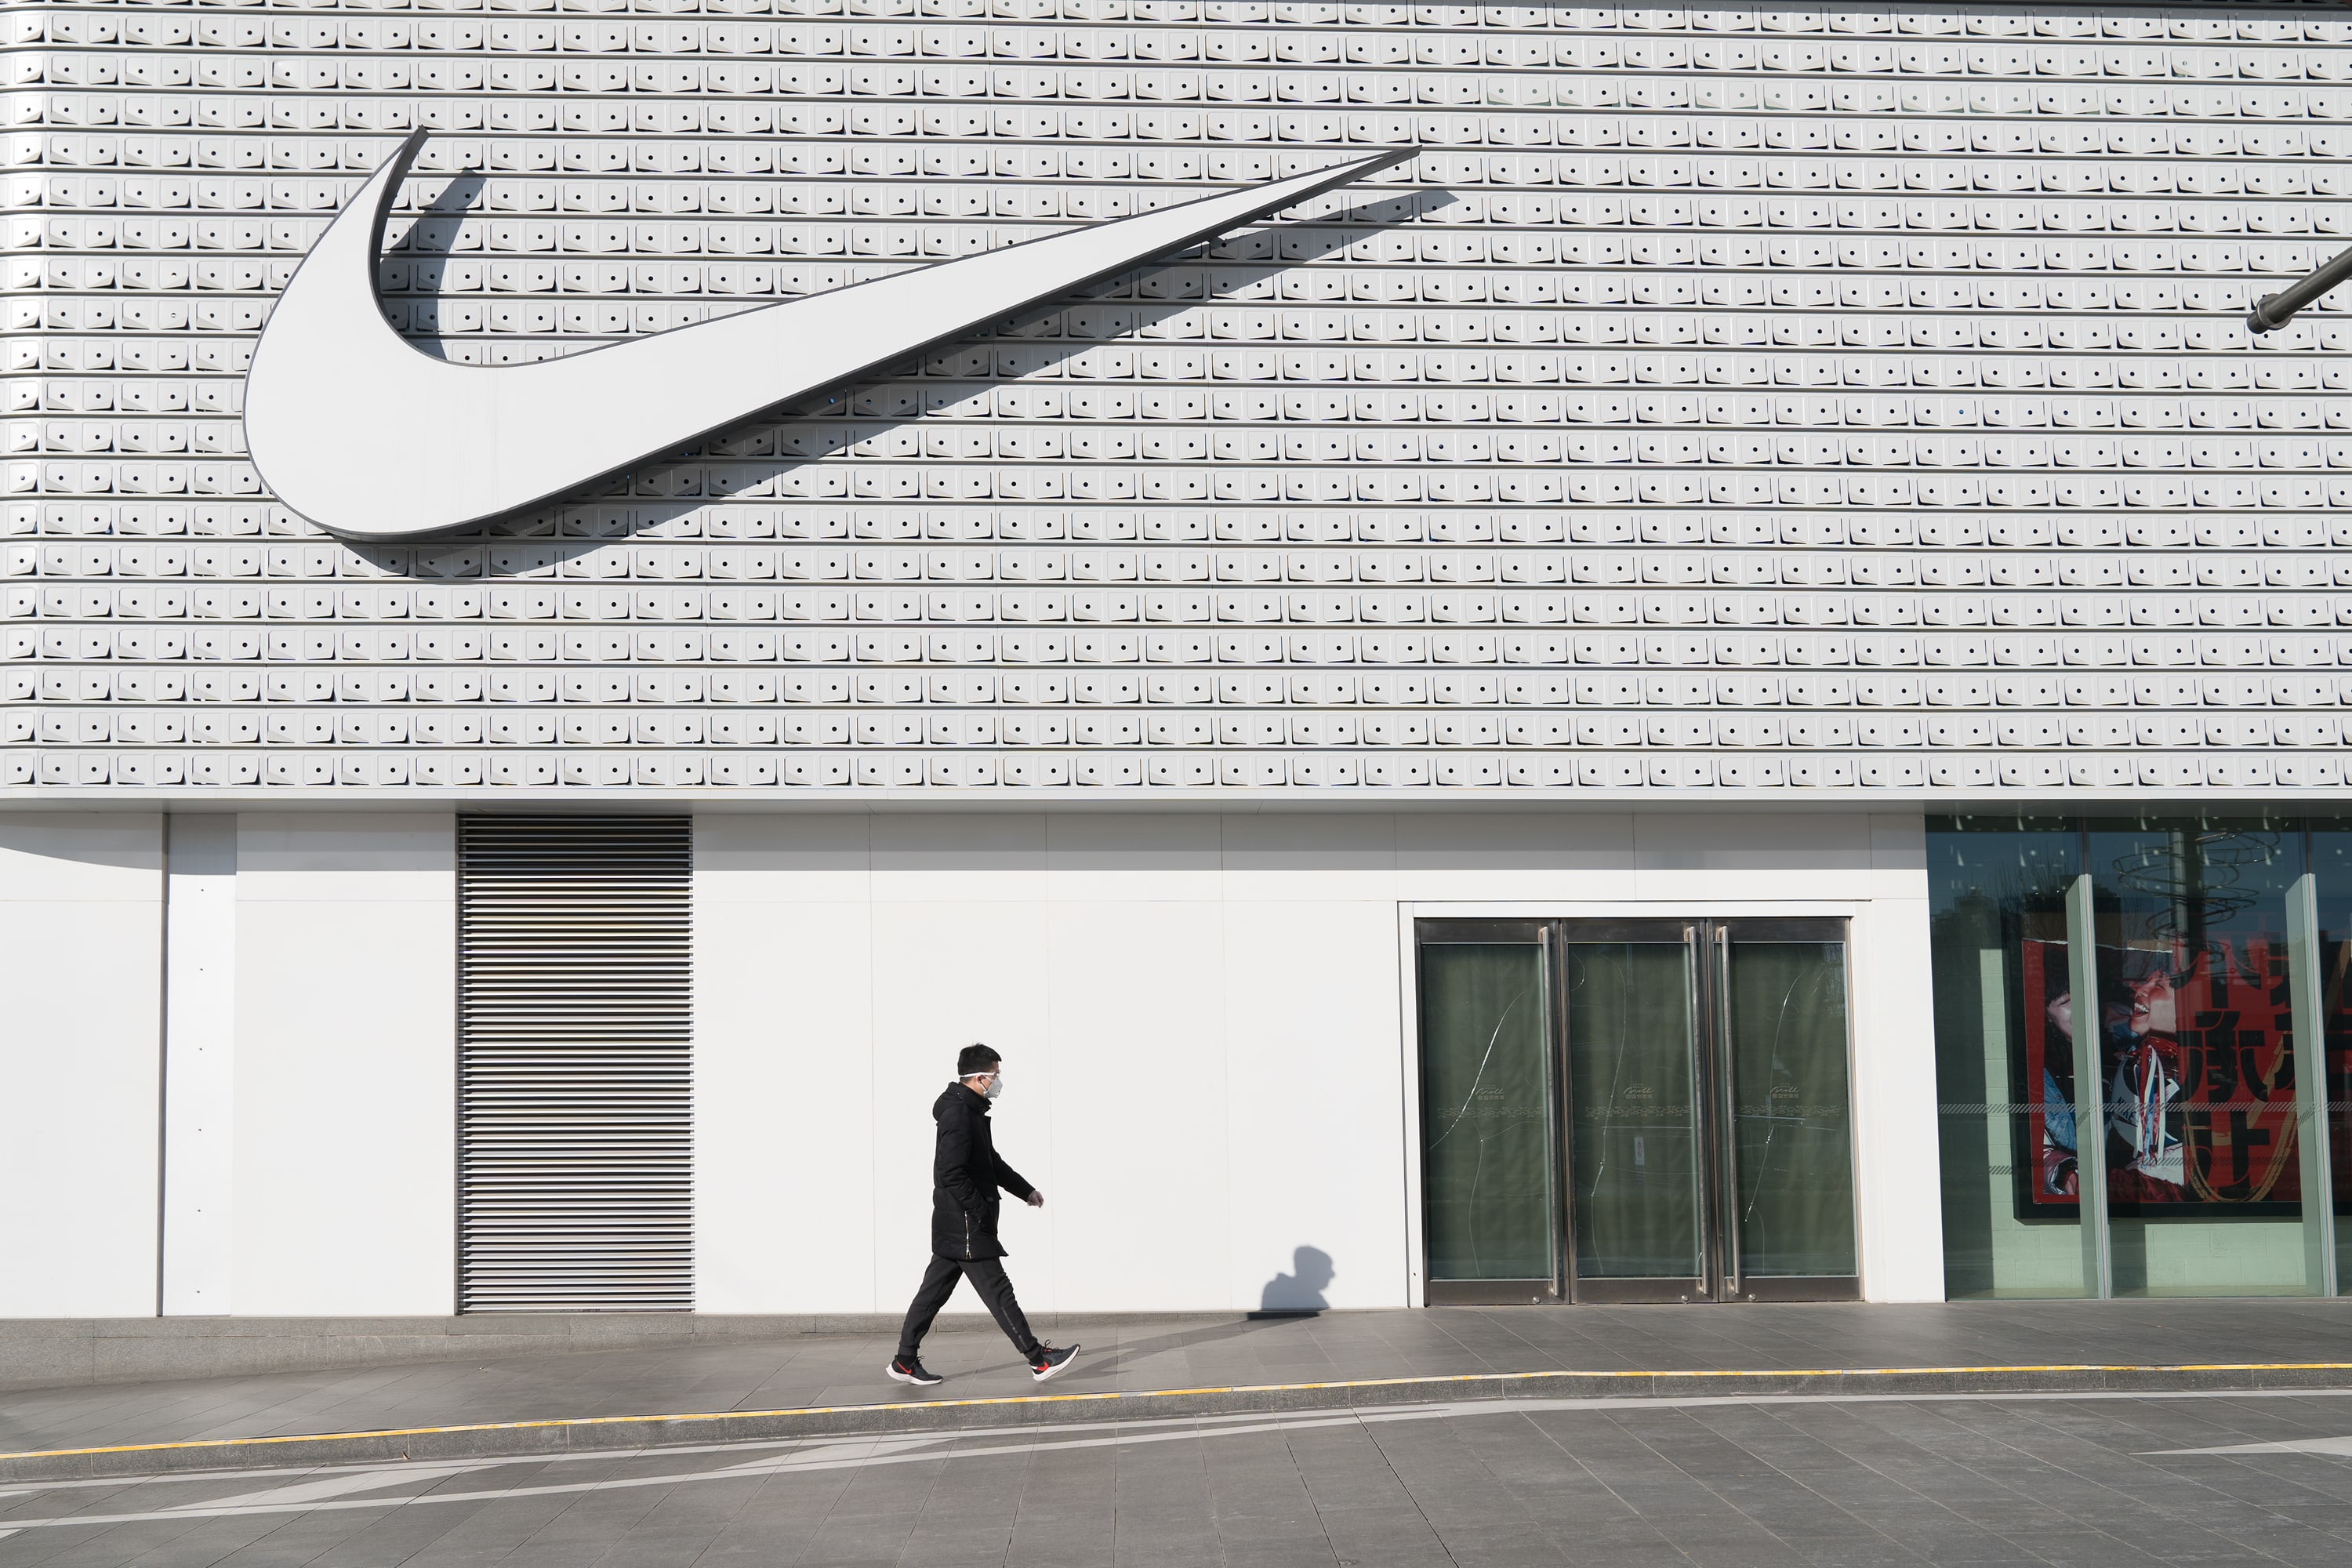 Nike shares are down after the mixed earnings report, layoff news